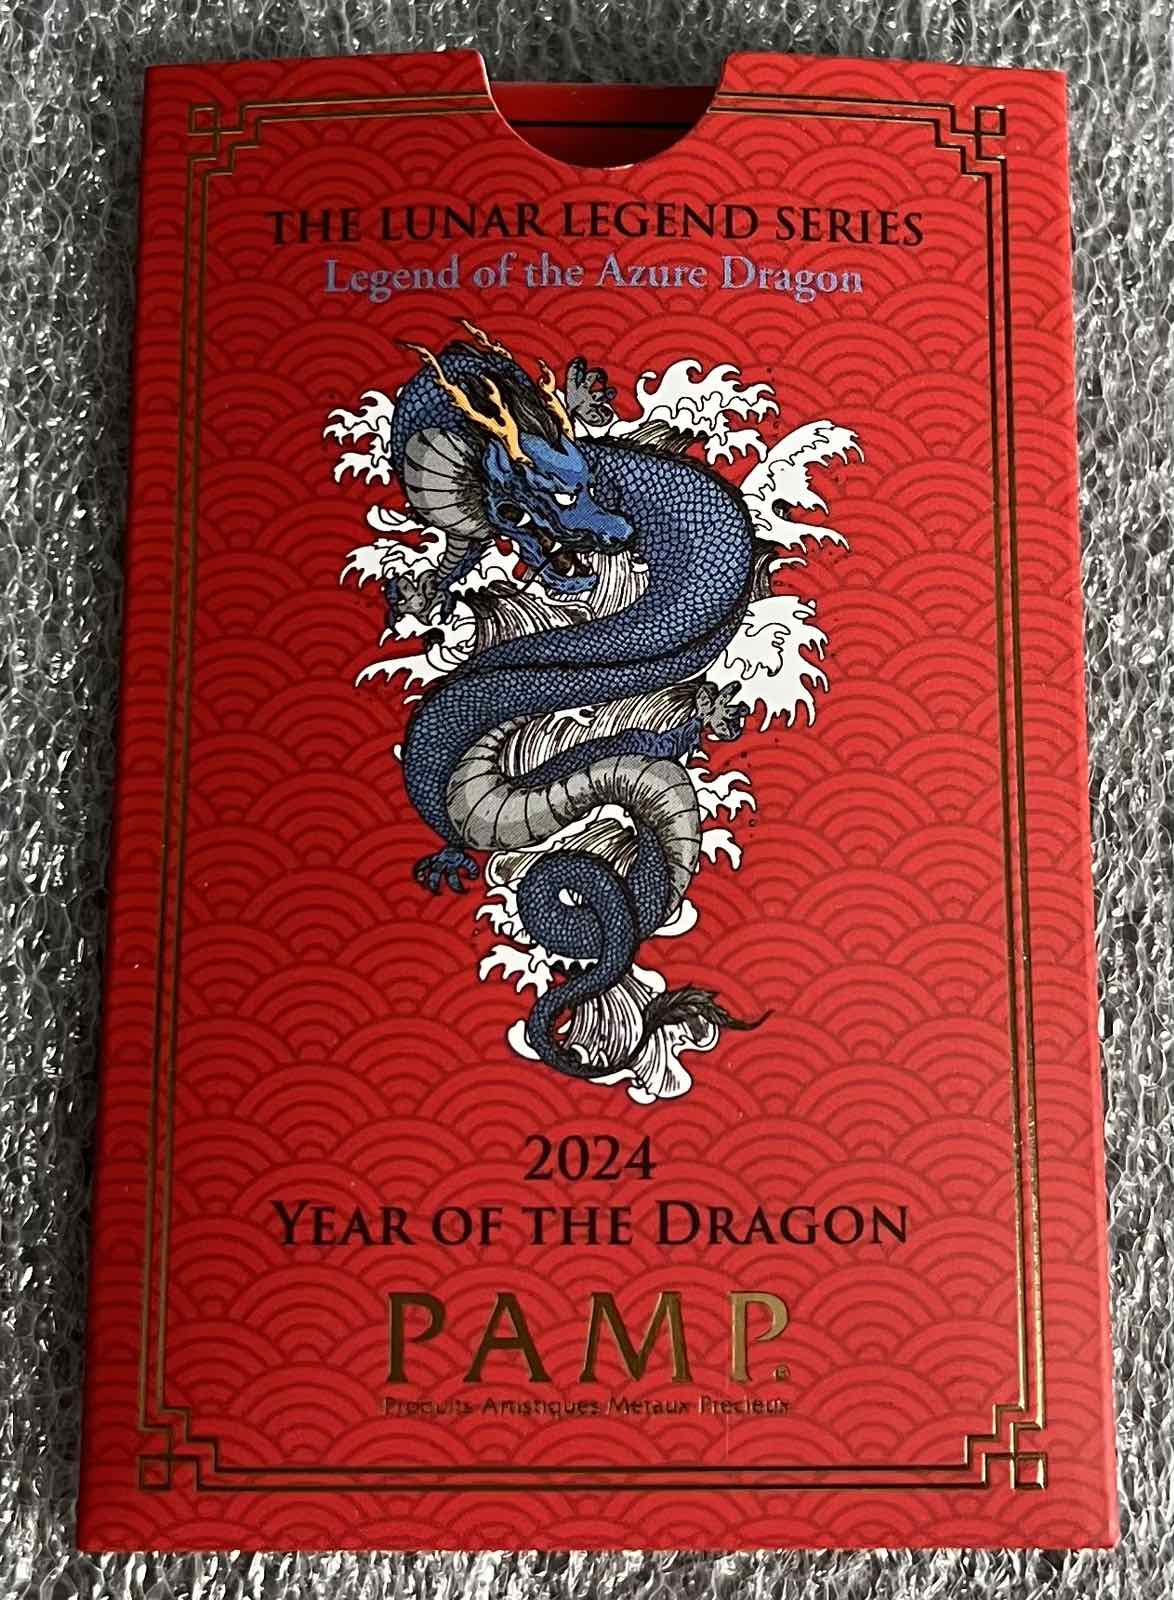 2024 PAMP Lunar Series "Year of the Dragon" 10 grams Silver Bar in Assay